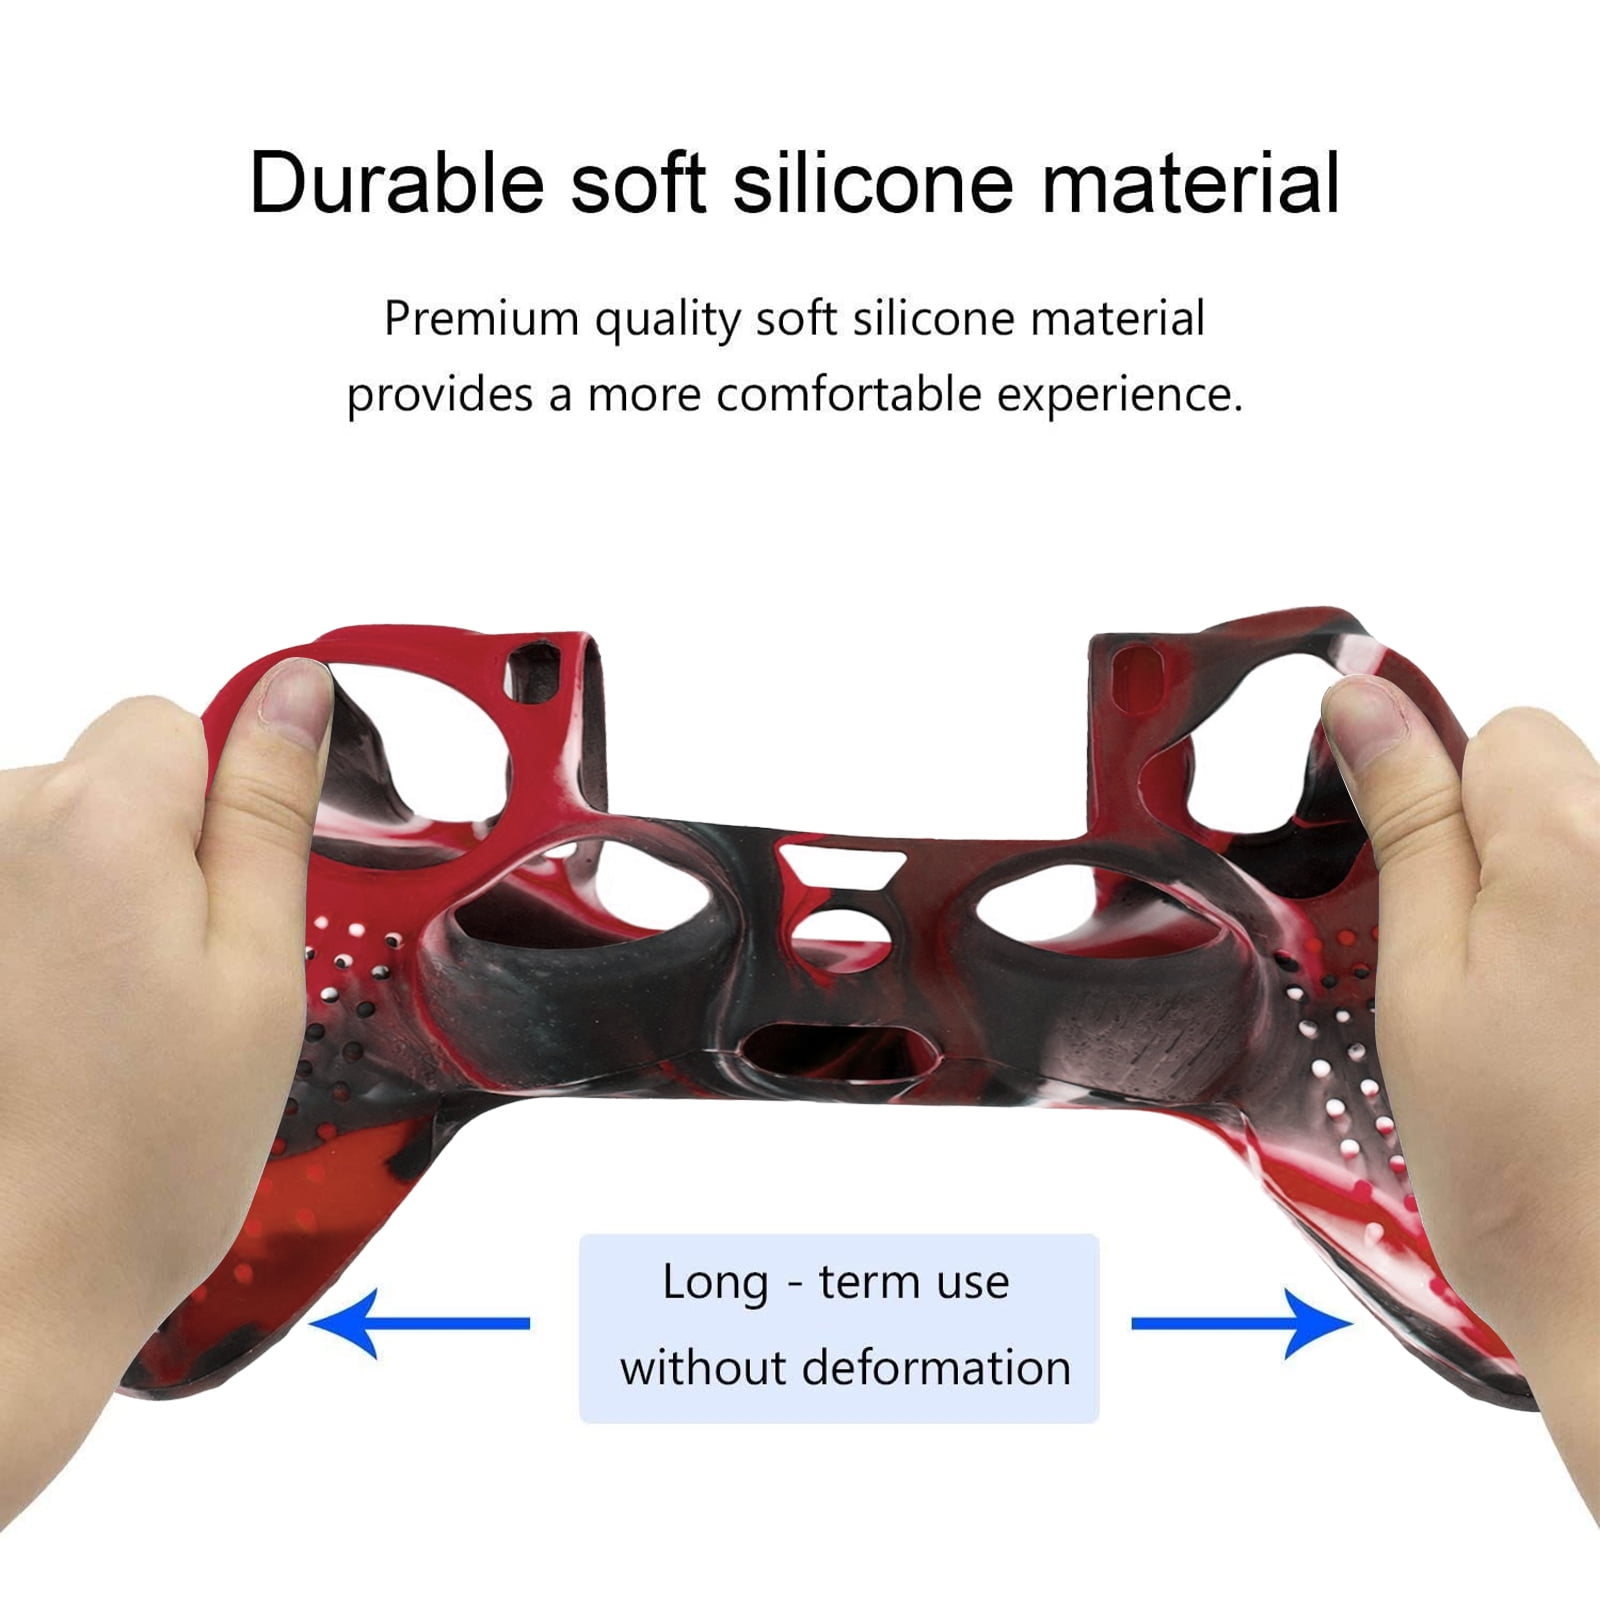 PS4 Controller Grip,Hikfly Skin Silicone Gel Controller Cover Case  Protector Compatible for PS4/PS4 Slim/PS4 Pro Controller (1x Controller  Cover with